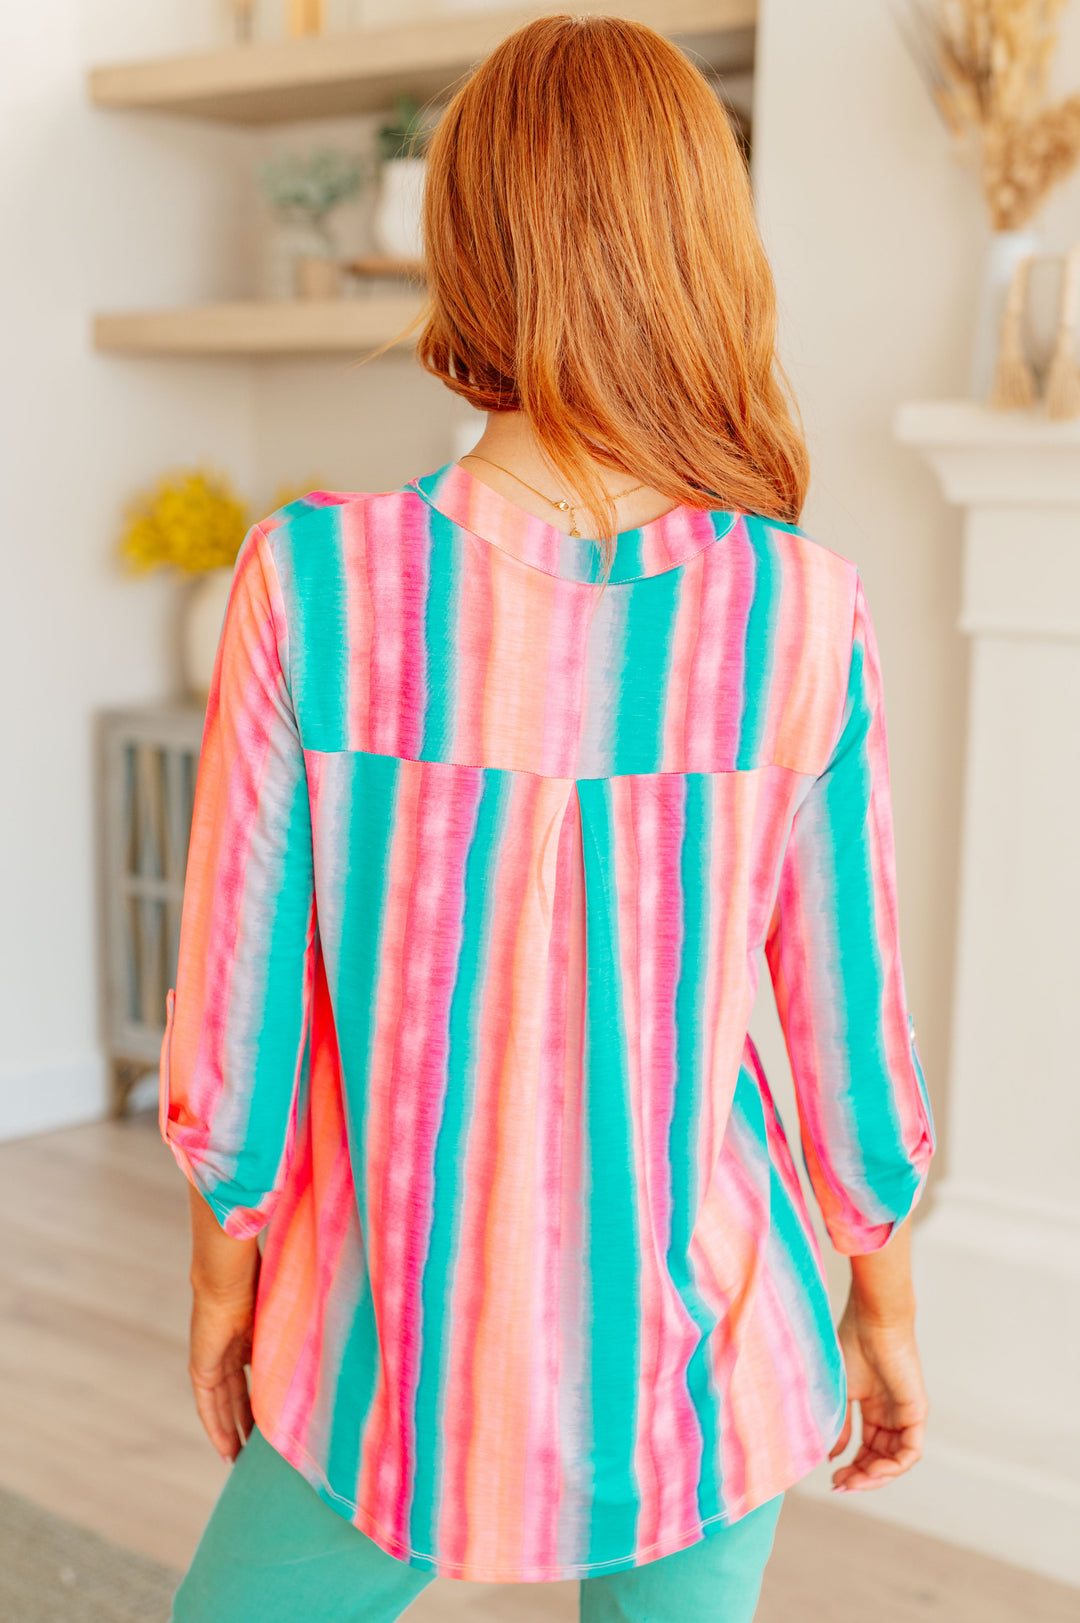 Chic & Easy 3/4 Sleeve Top - Ombre Mint Stripe